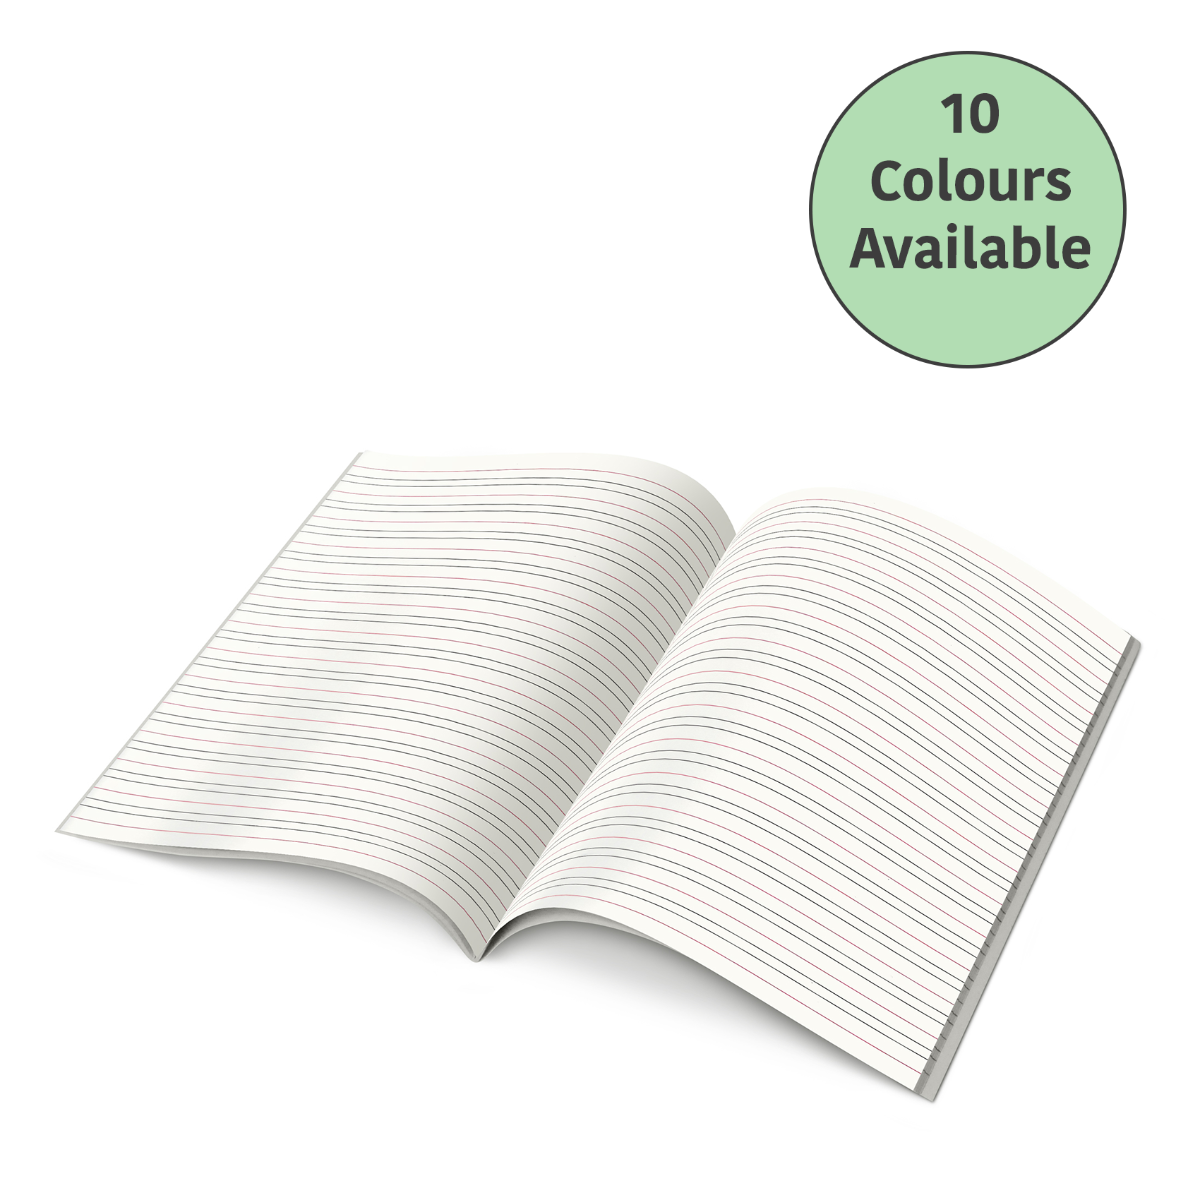 Tinted Paper Handwriting Exercise Book - 9